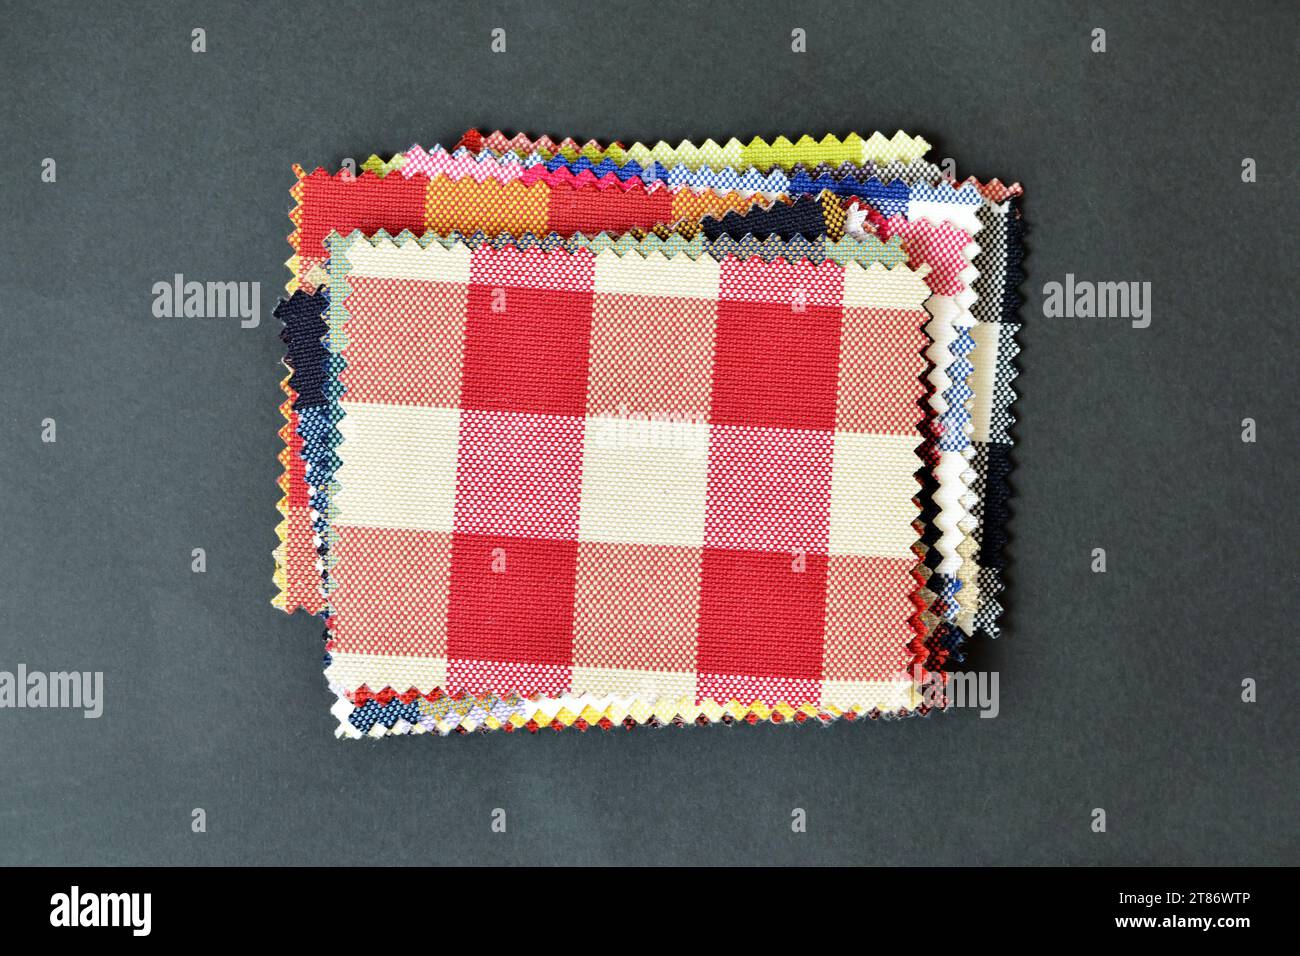 Checkered fabric pattern samples on black background Stock Photo